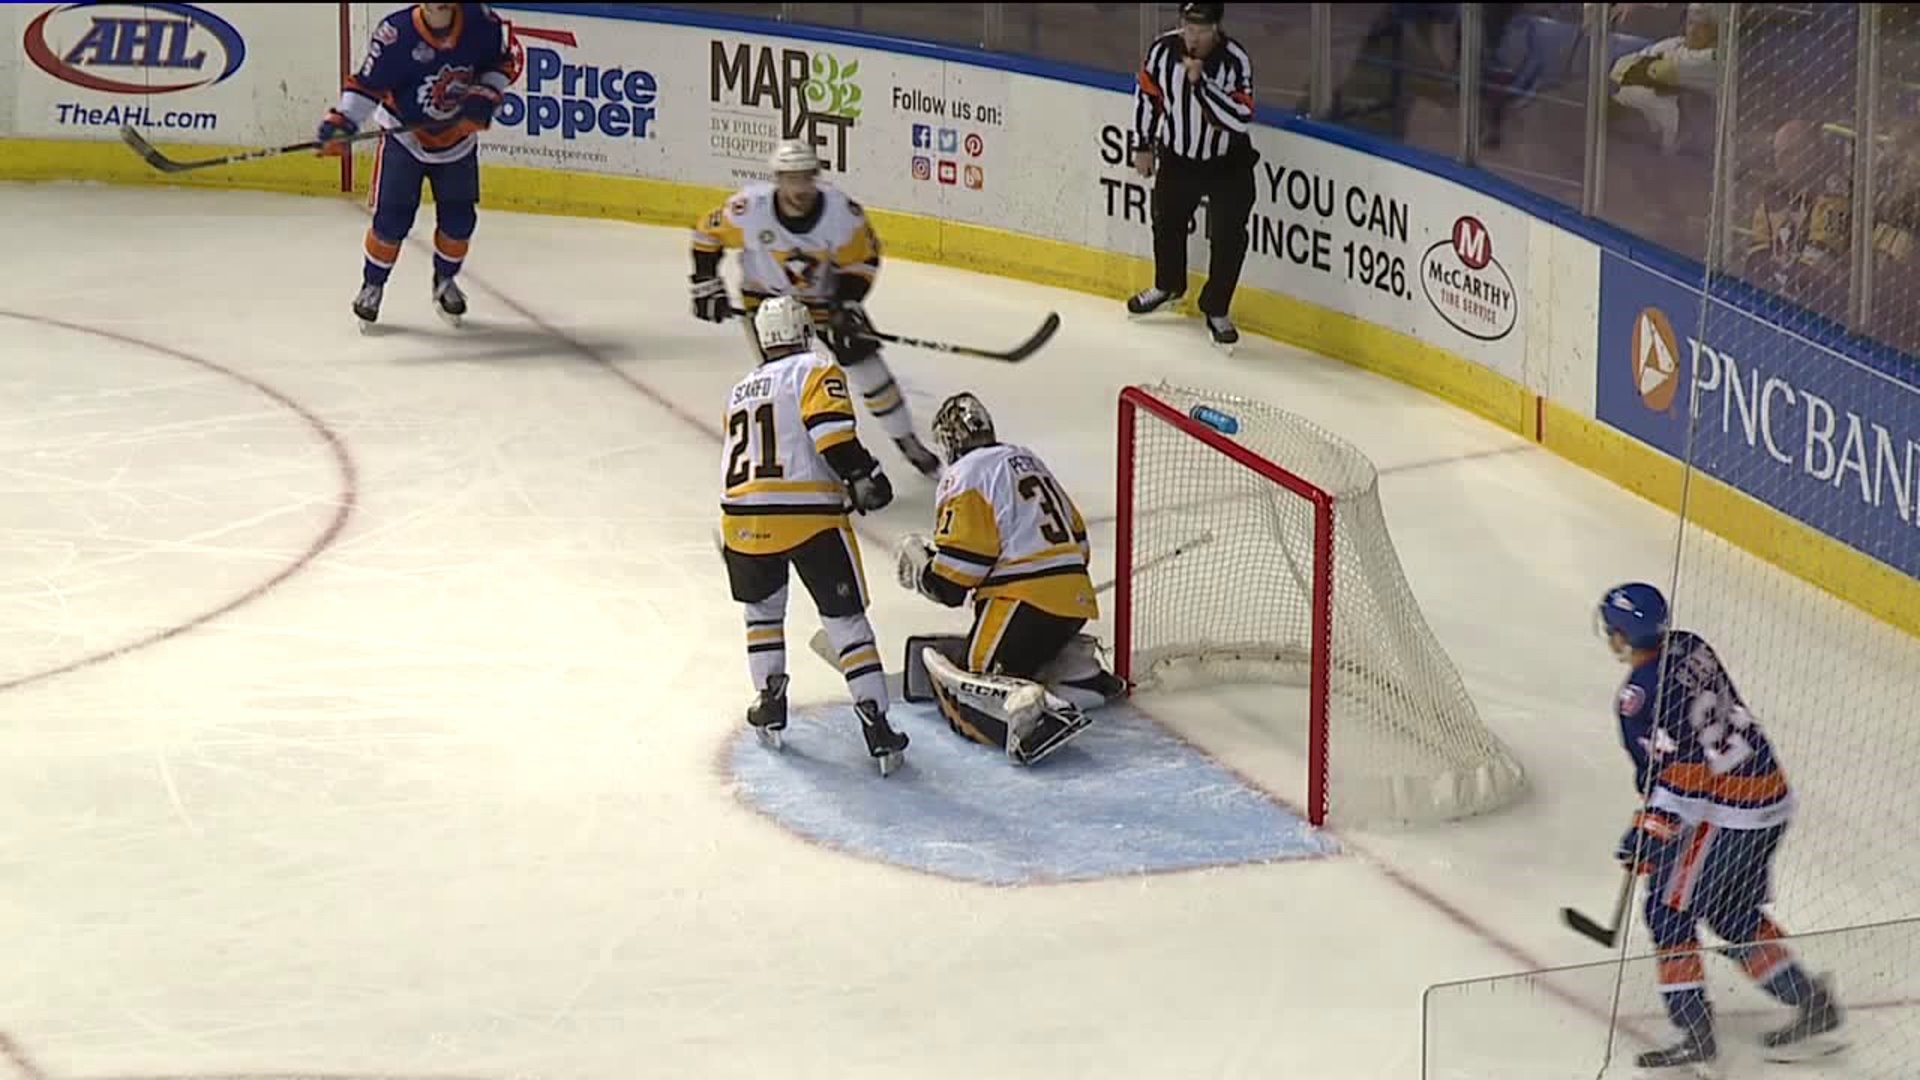 Peters Helps Penguins to 3-1 Win Over Sound Tigers